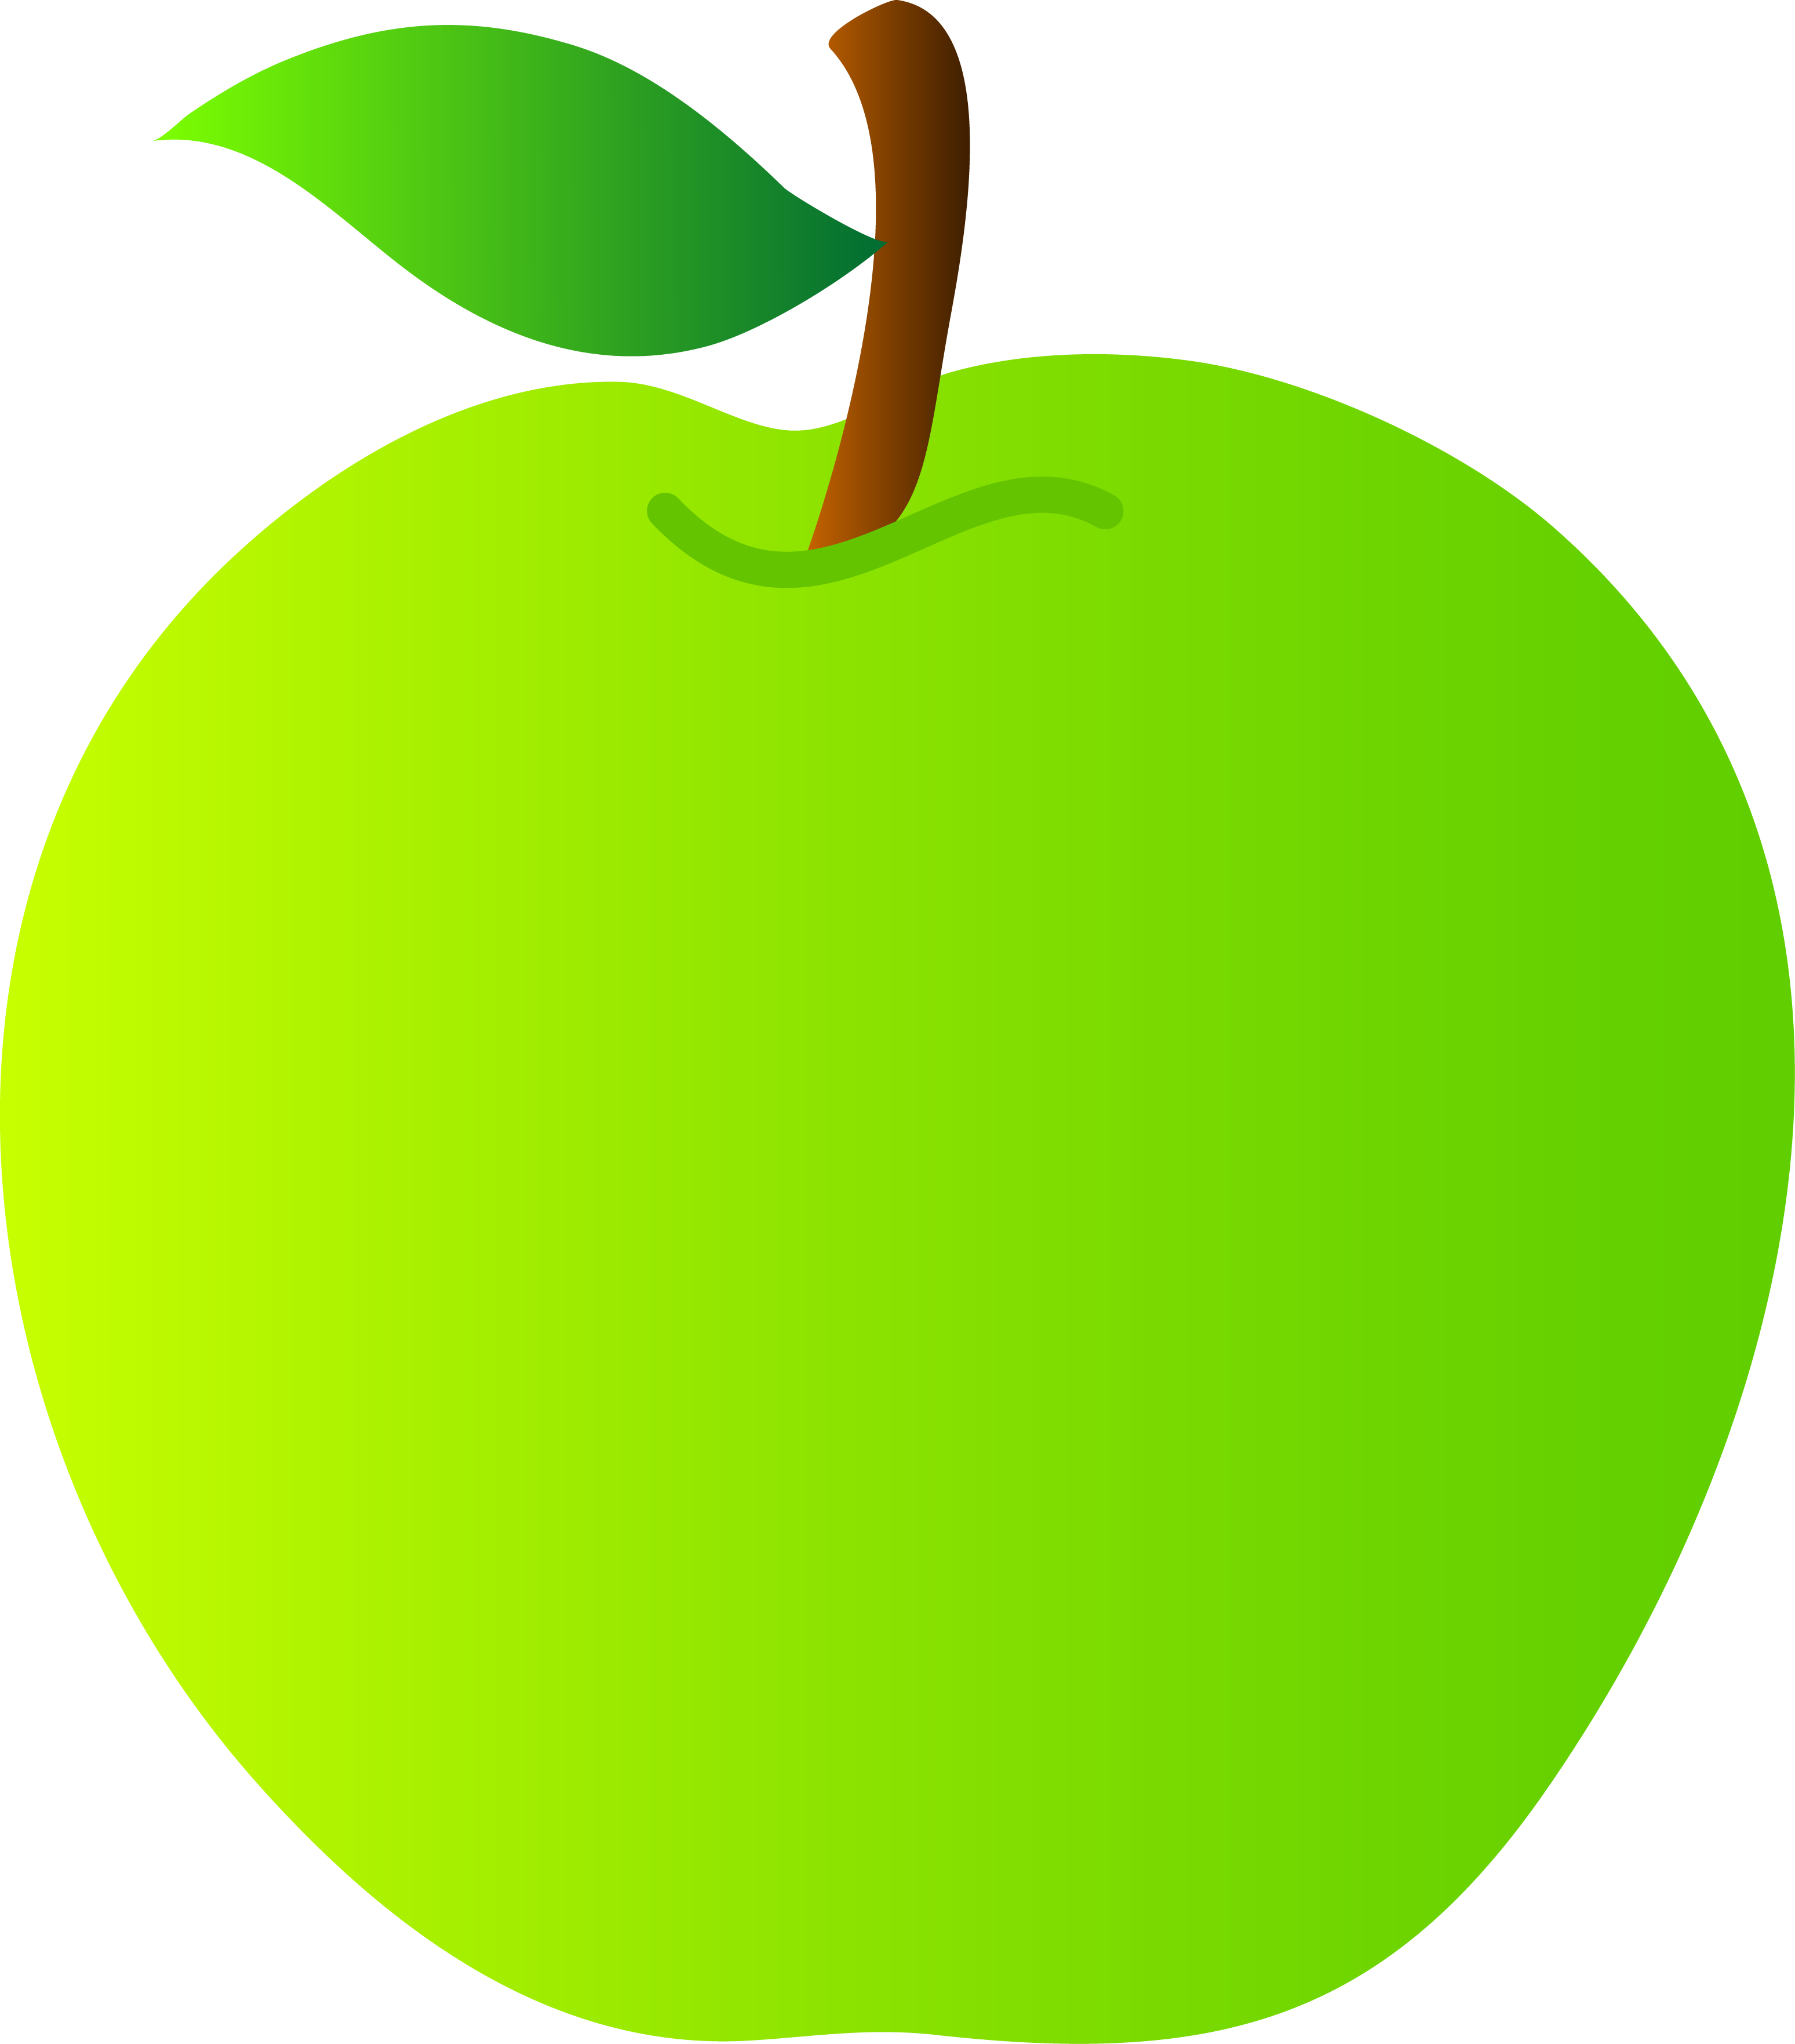 Green apple clipart free clipart images